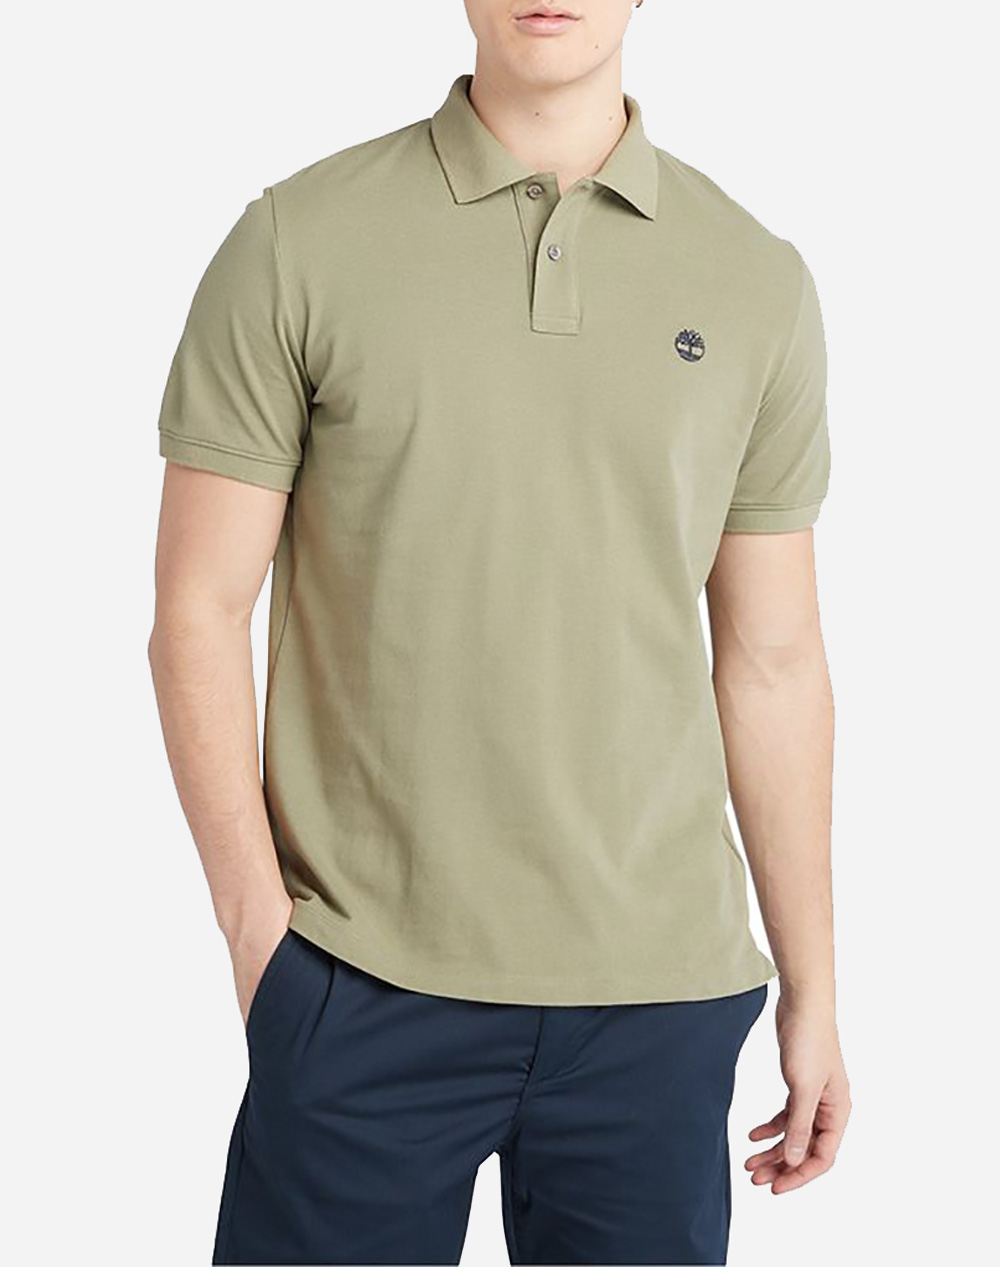 TIMBERLAND Pique Short Sleeve Polo TB0A26N4-590 Olive